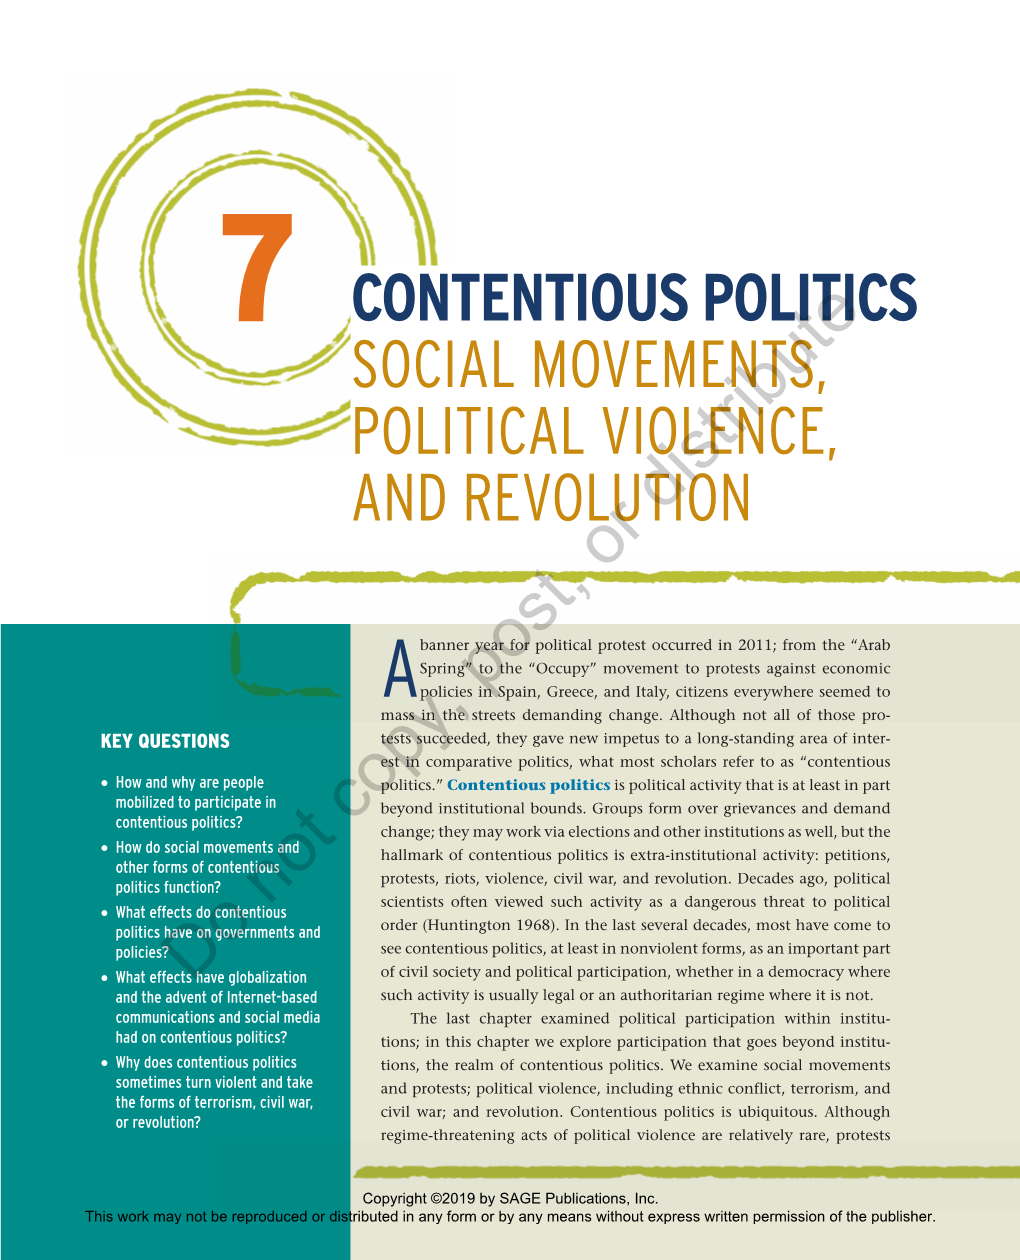 7 CONTENTIOUS POLITICS SOCIAL MOVEMENTS, POLITICAL VIOLENCE, and Revolutiondistribute Or